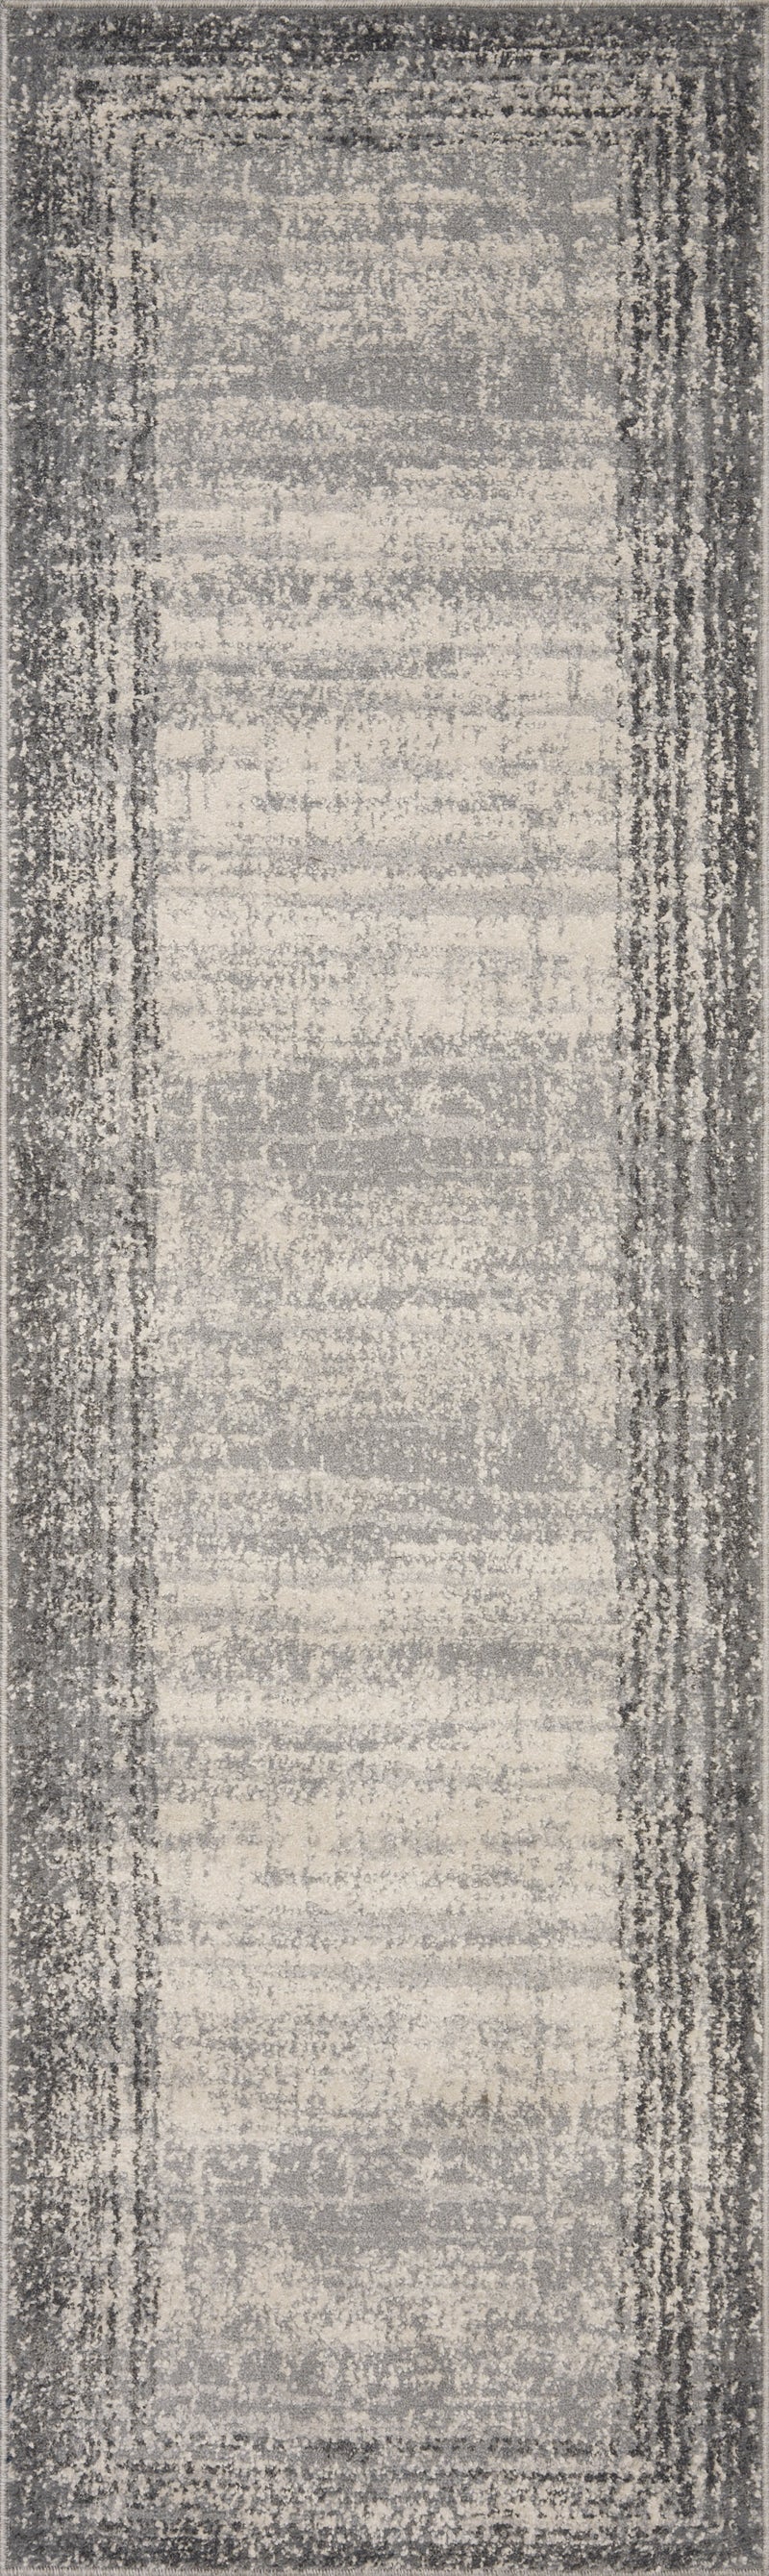 media image for Austen Rug in Pebble / Charcoal by Loloi II 252